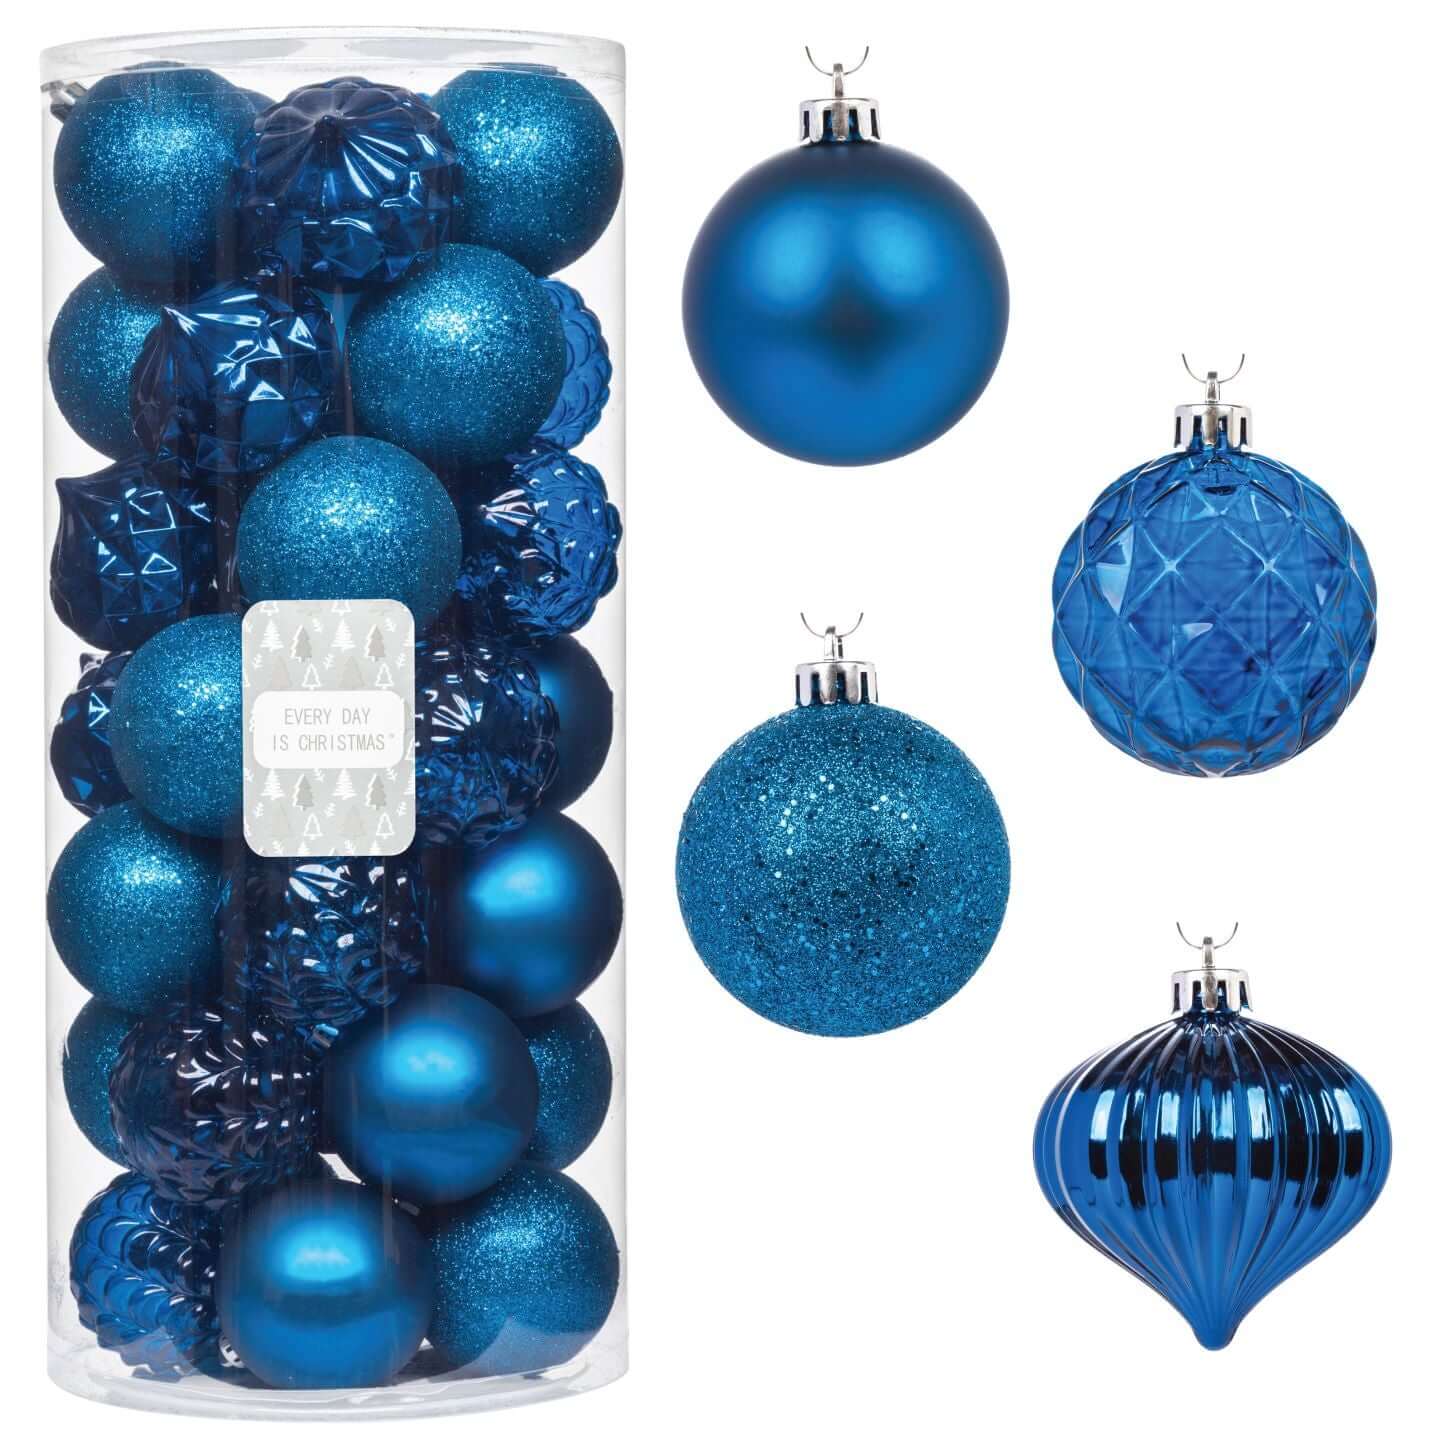 Every Day is Christmas Ornaments Shop and Store